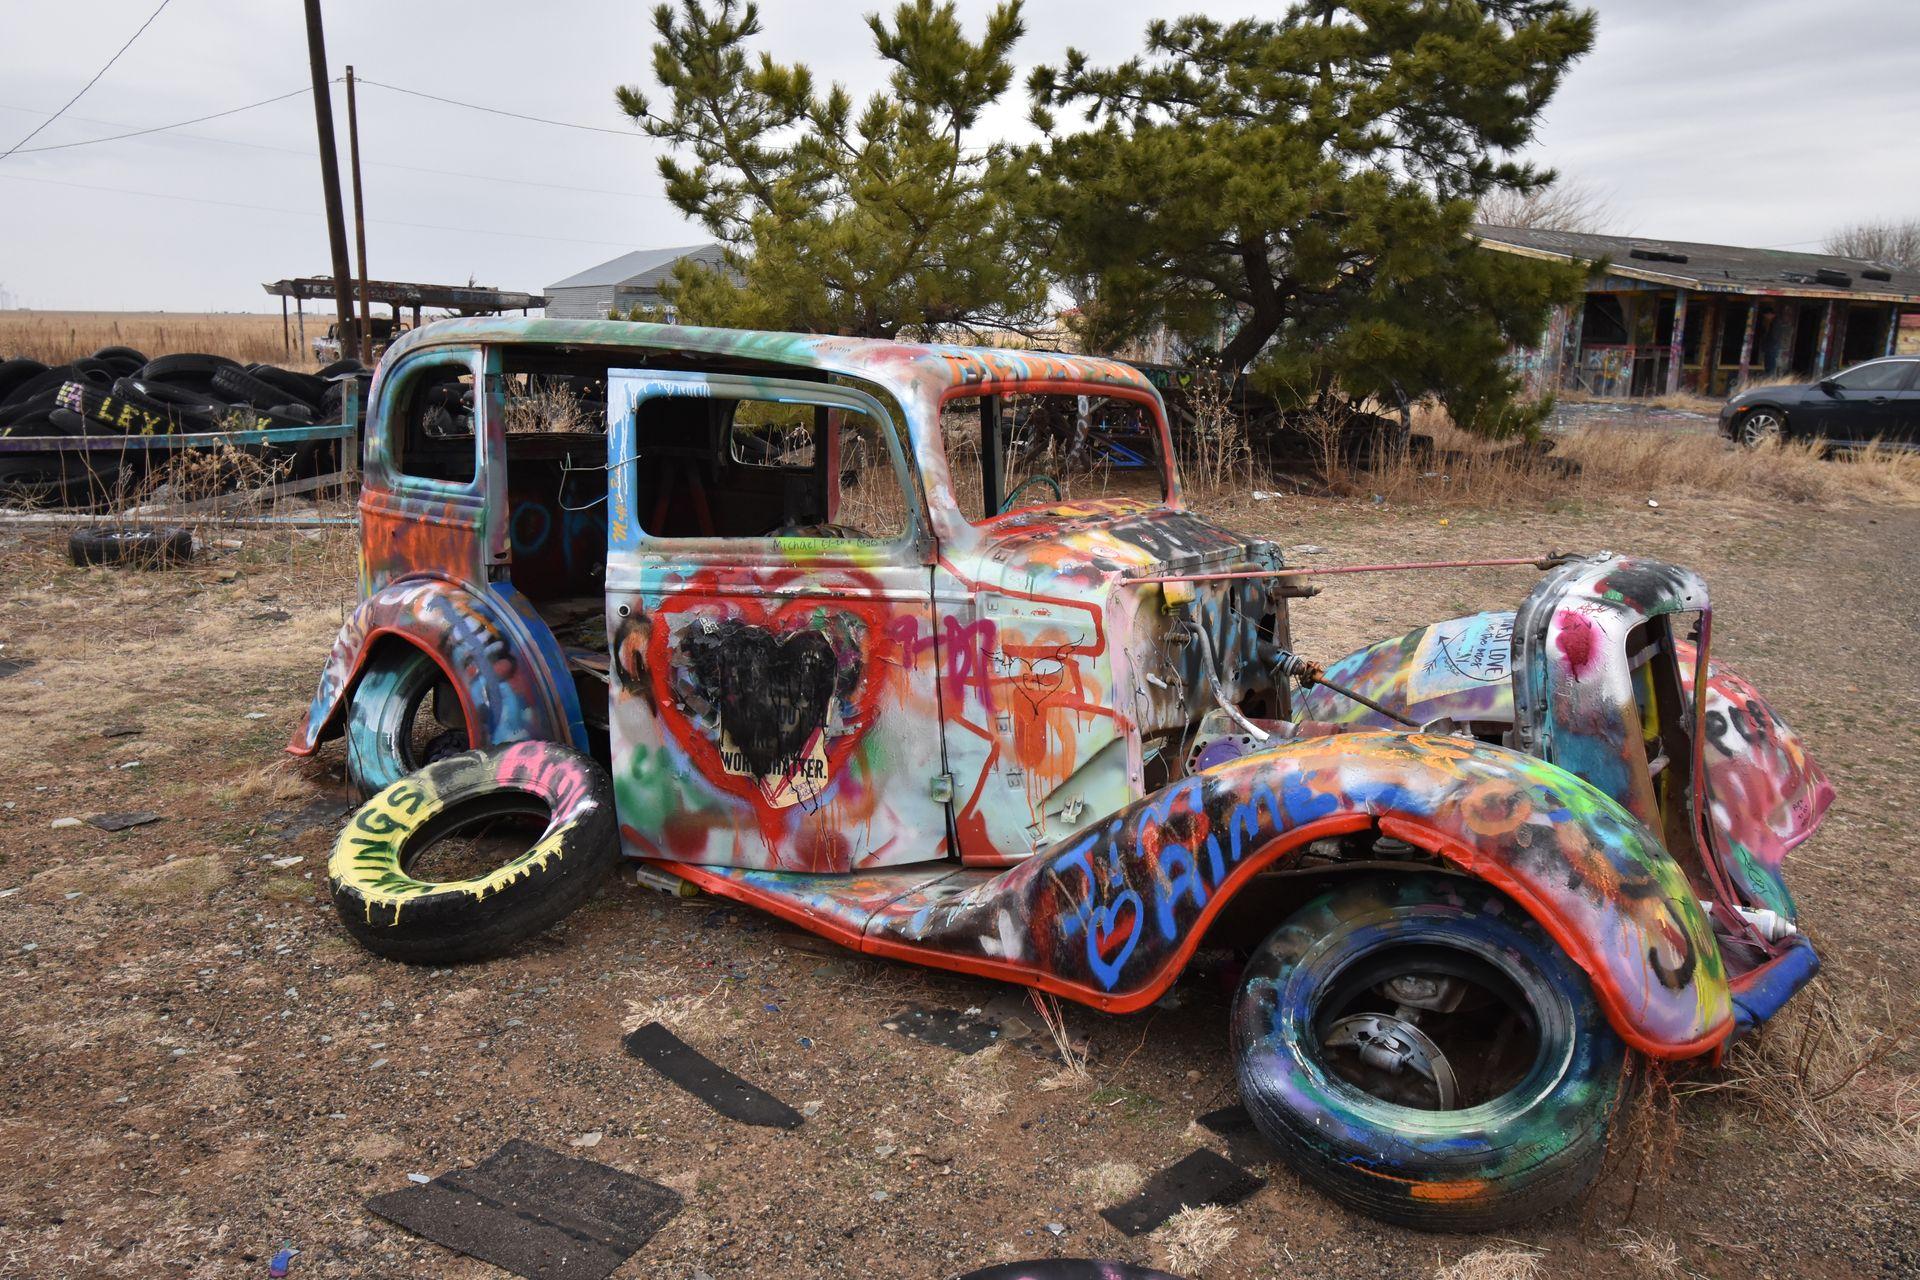 A vintage car covered in spray paint.